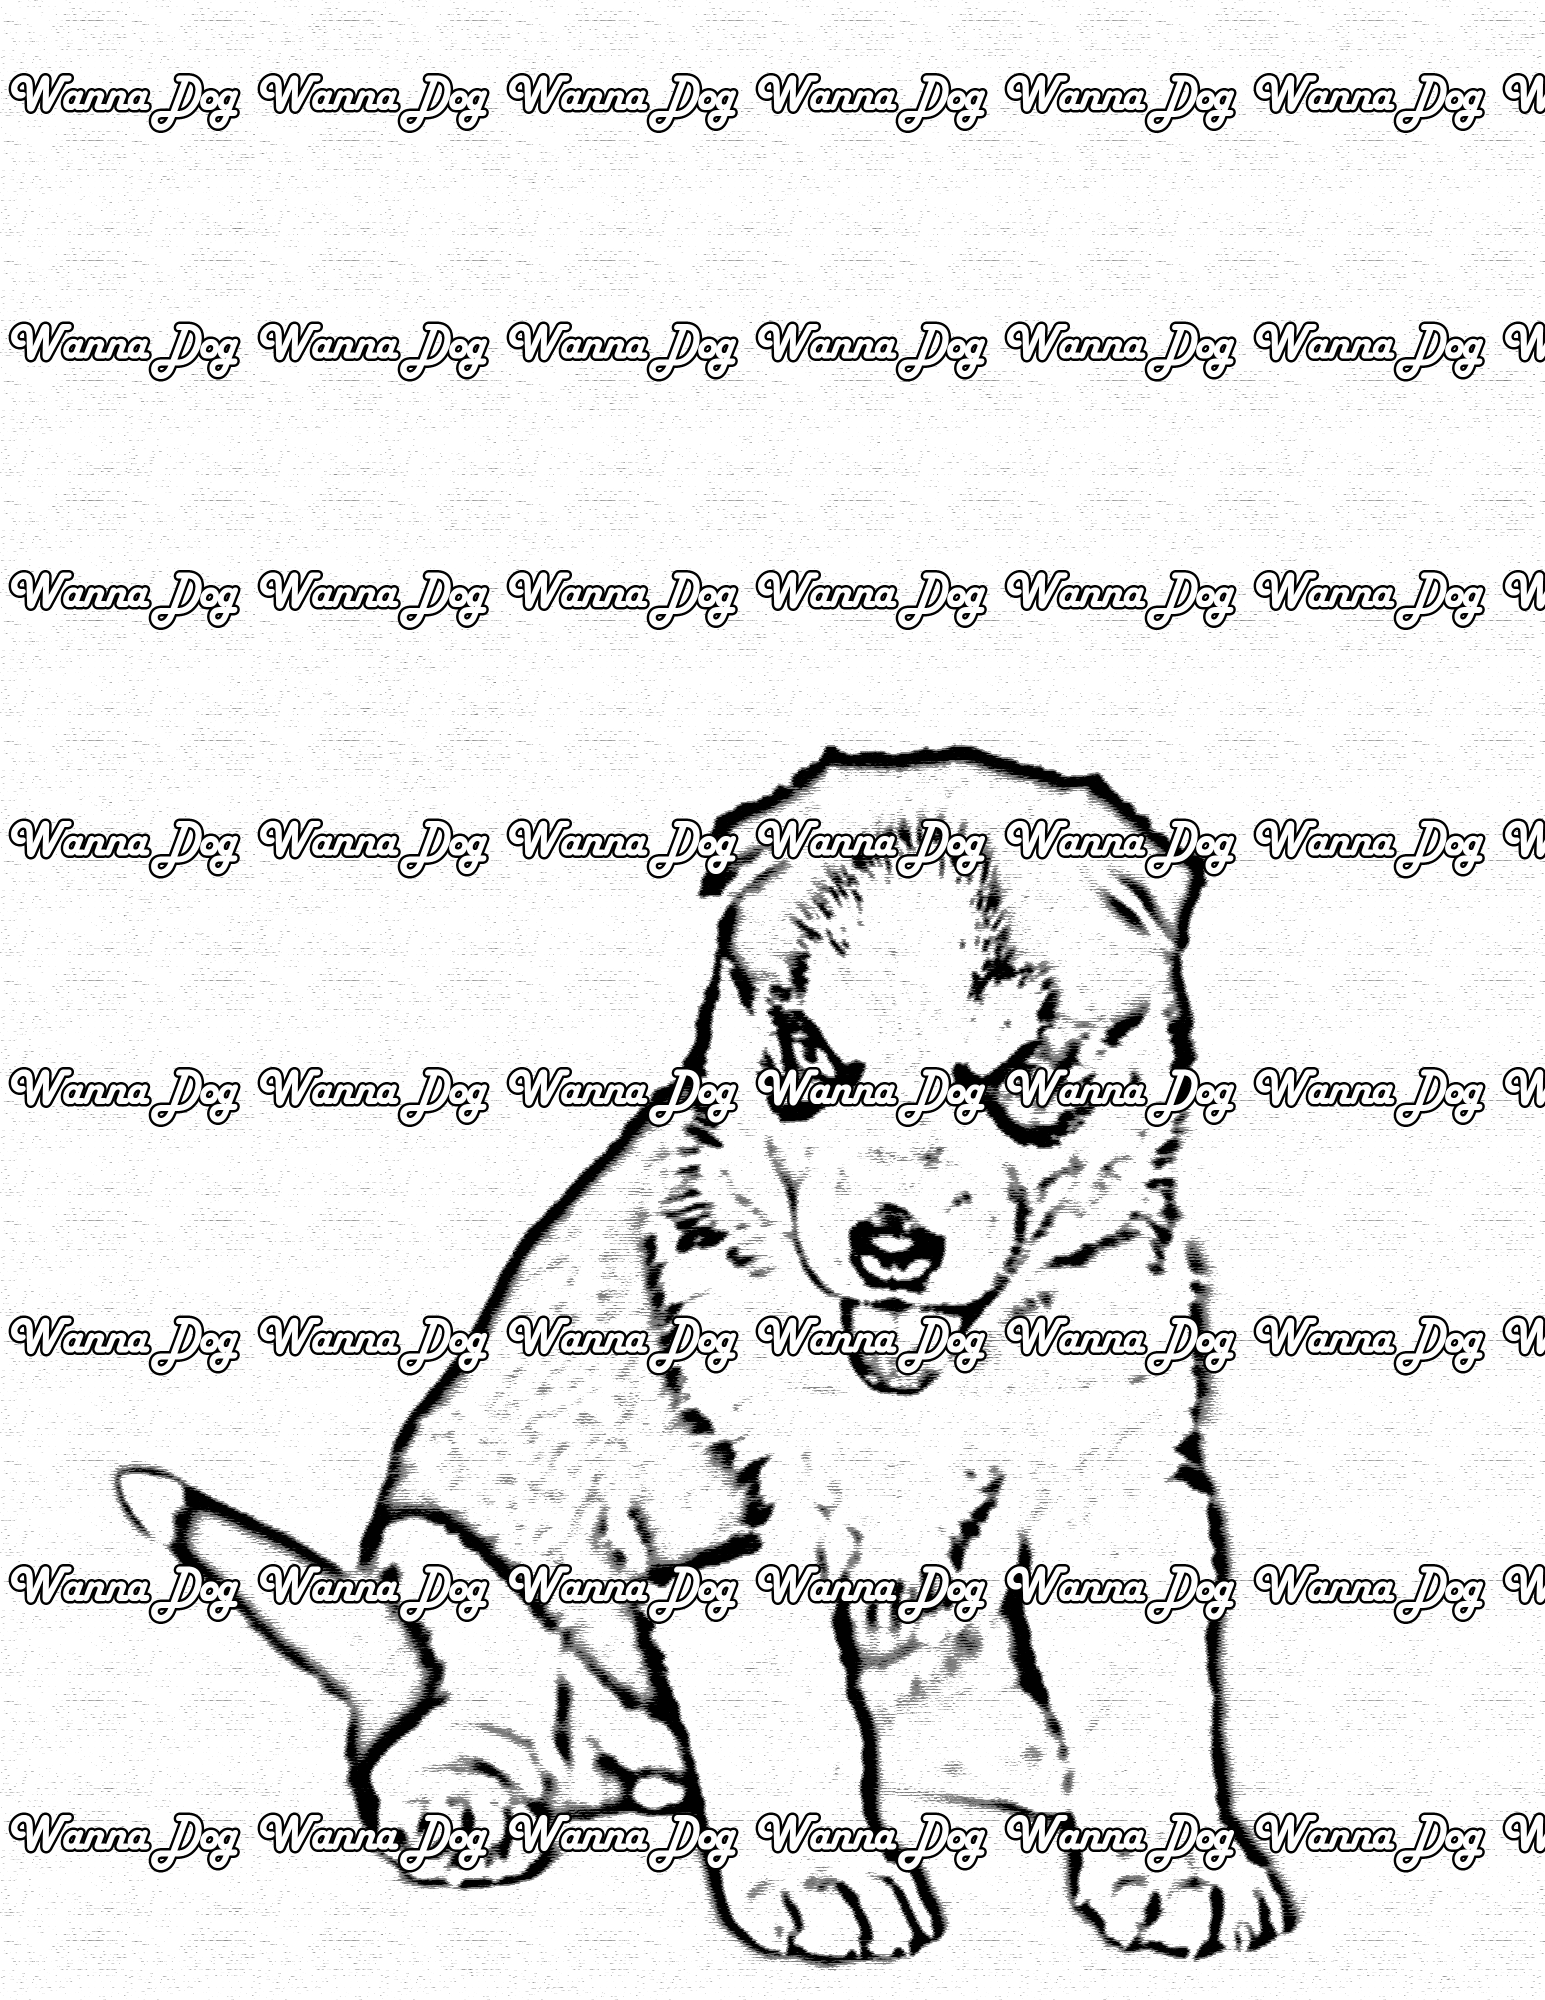 Husky Puppy Coloring Page of a Husky Puppy sitting with their tongue out